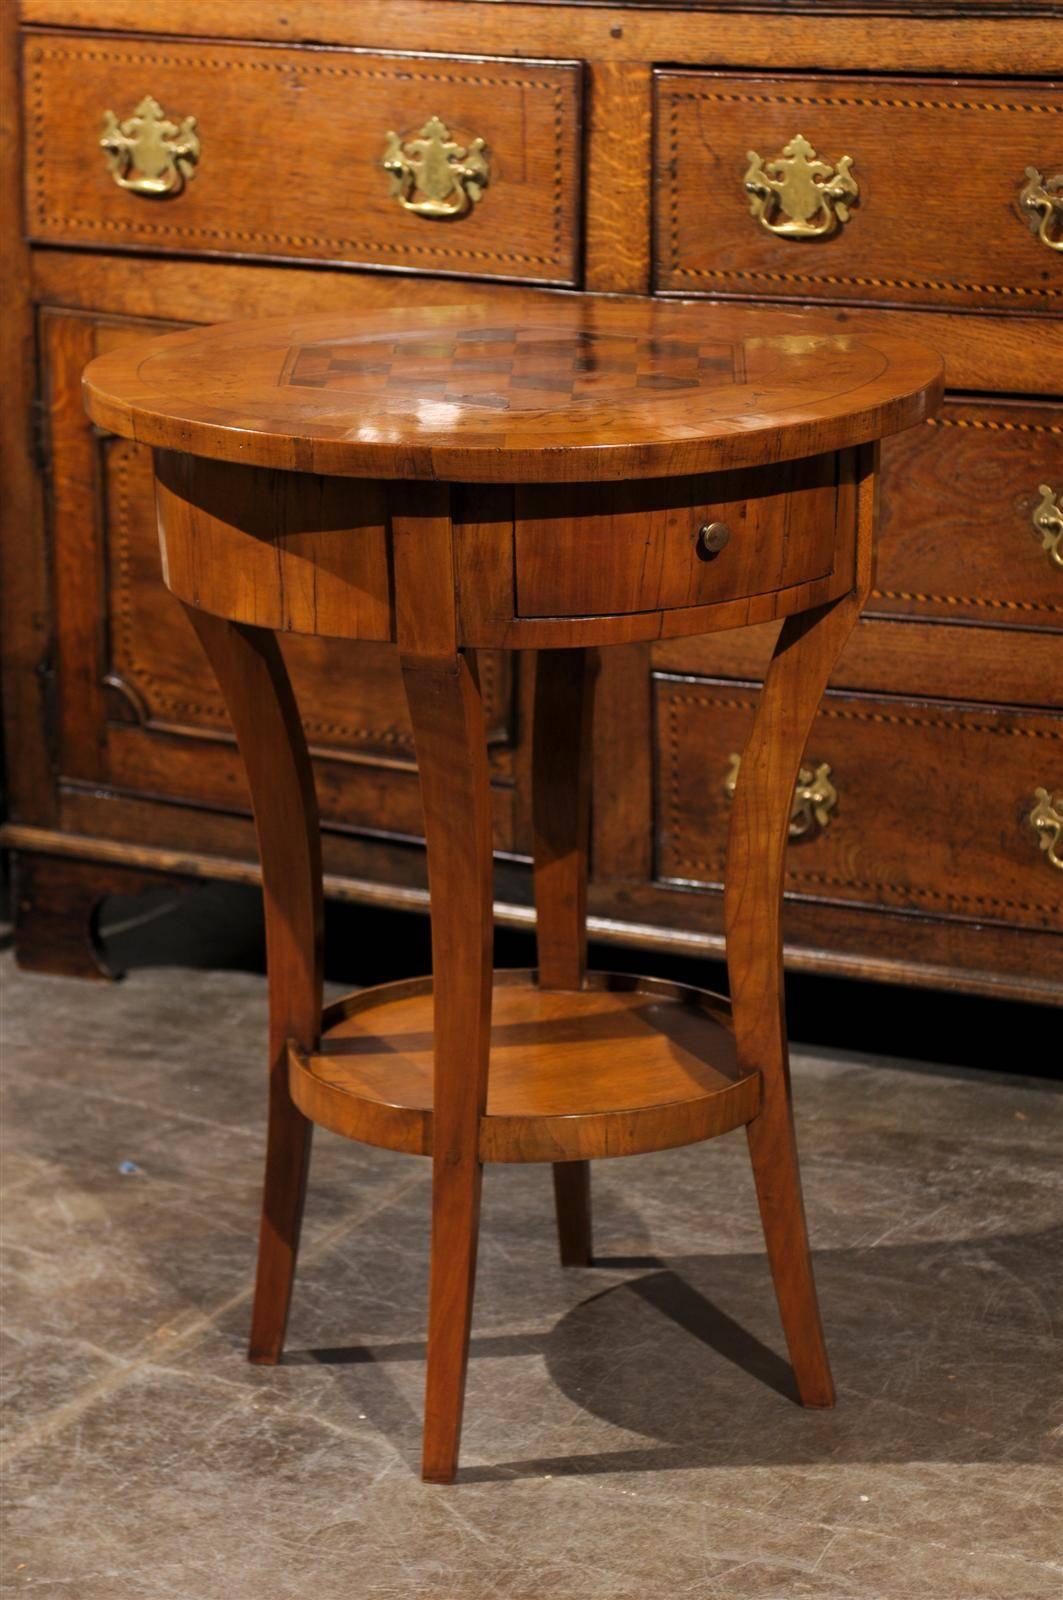 This petite Italian side table from the early 19th century features a round top decorated with cube parquetry inlay in the centre, surrounded by an exquisite marquetry of floral motifs. Below this lovely top is the circular apron with its single